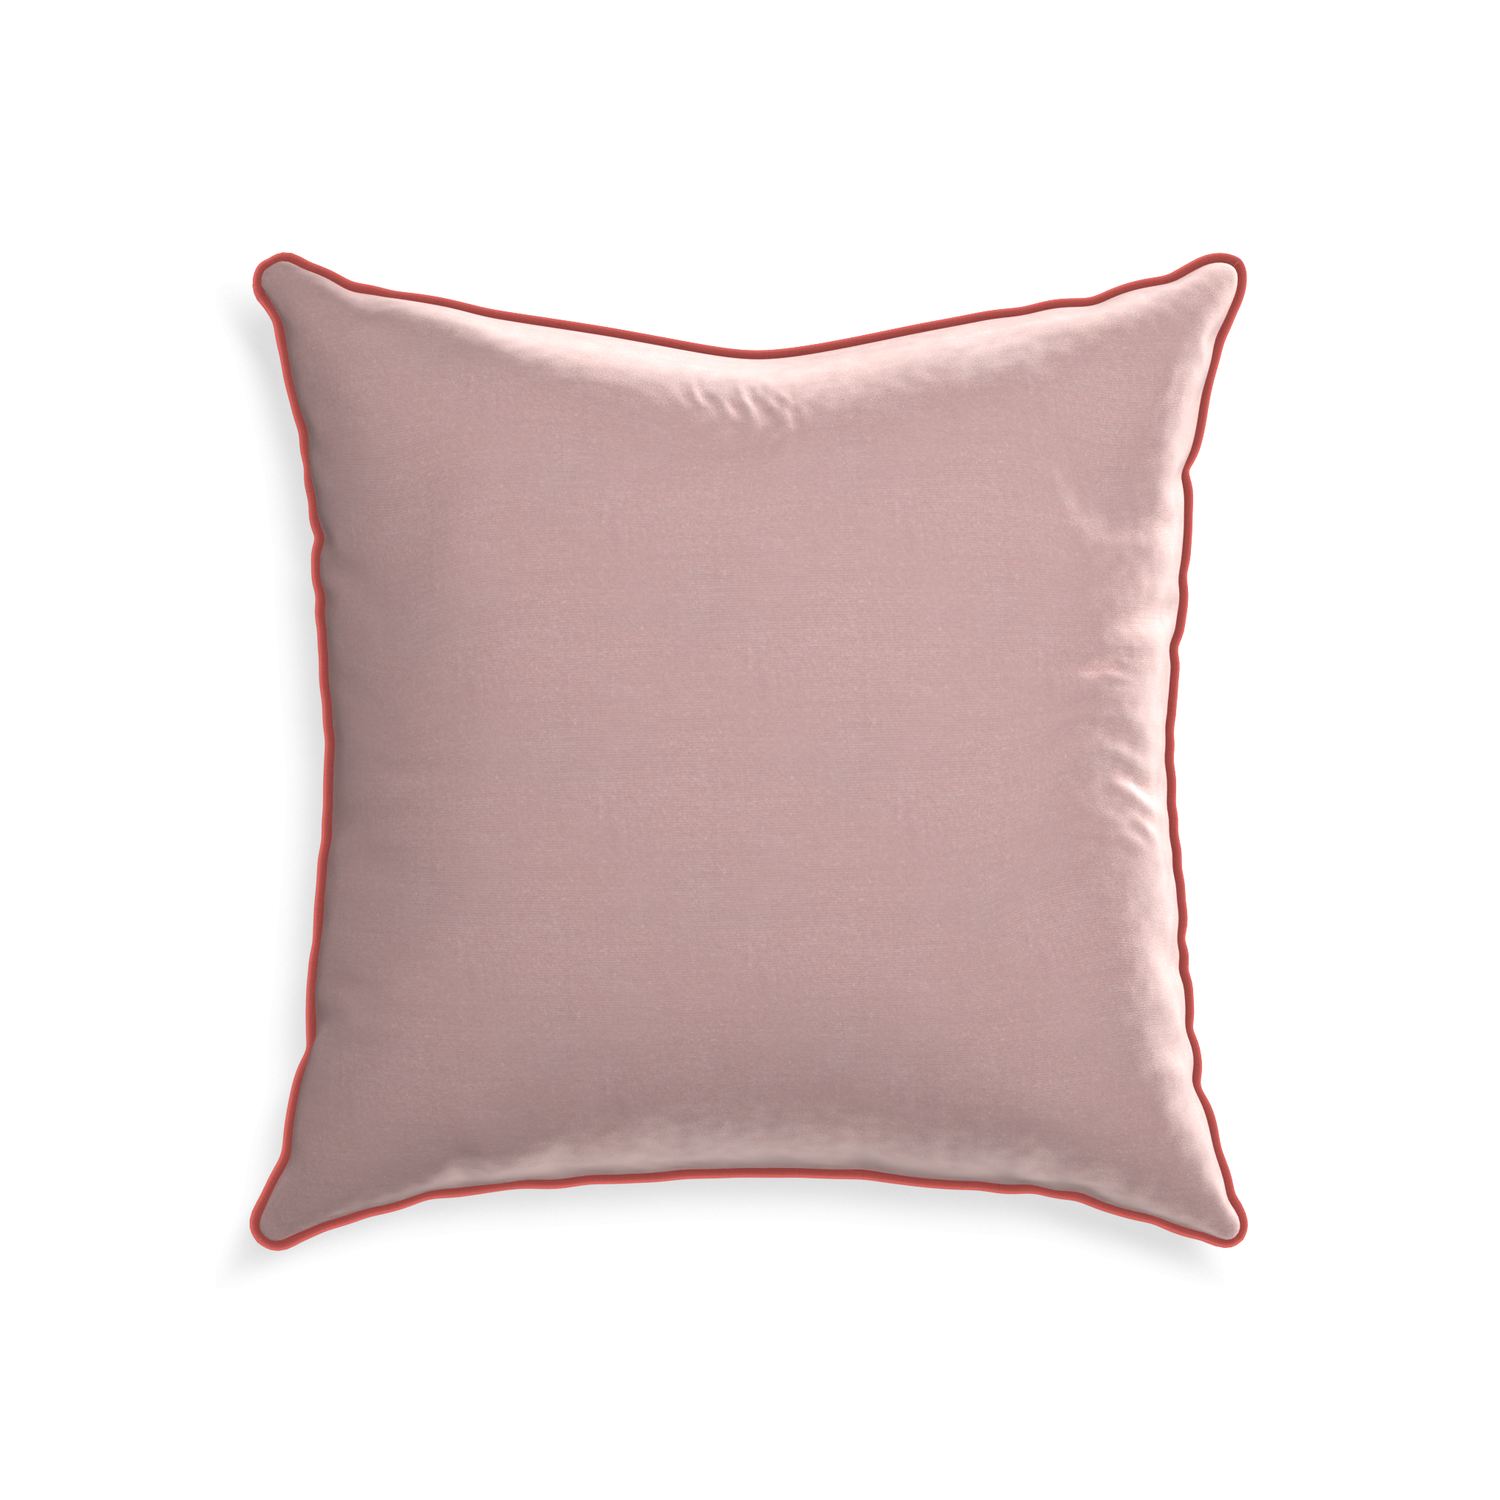 22-square mauve velvet custom pillow with c piping on white background